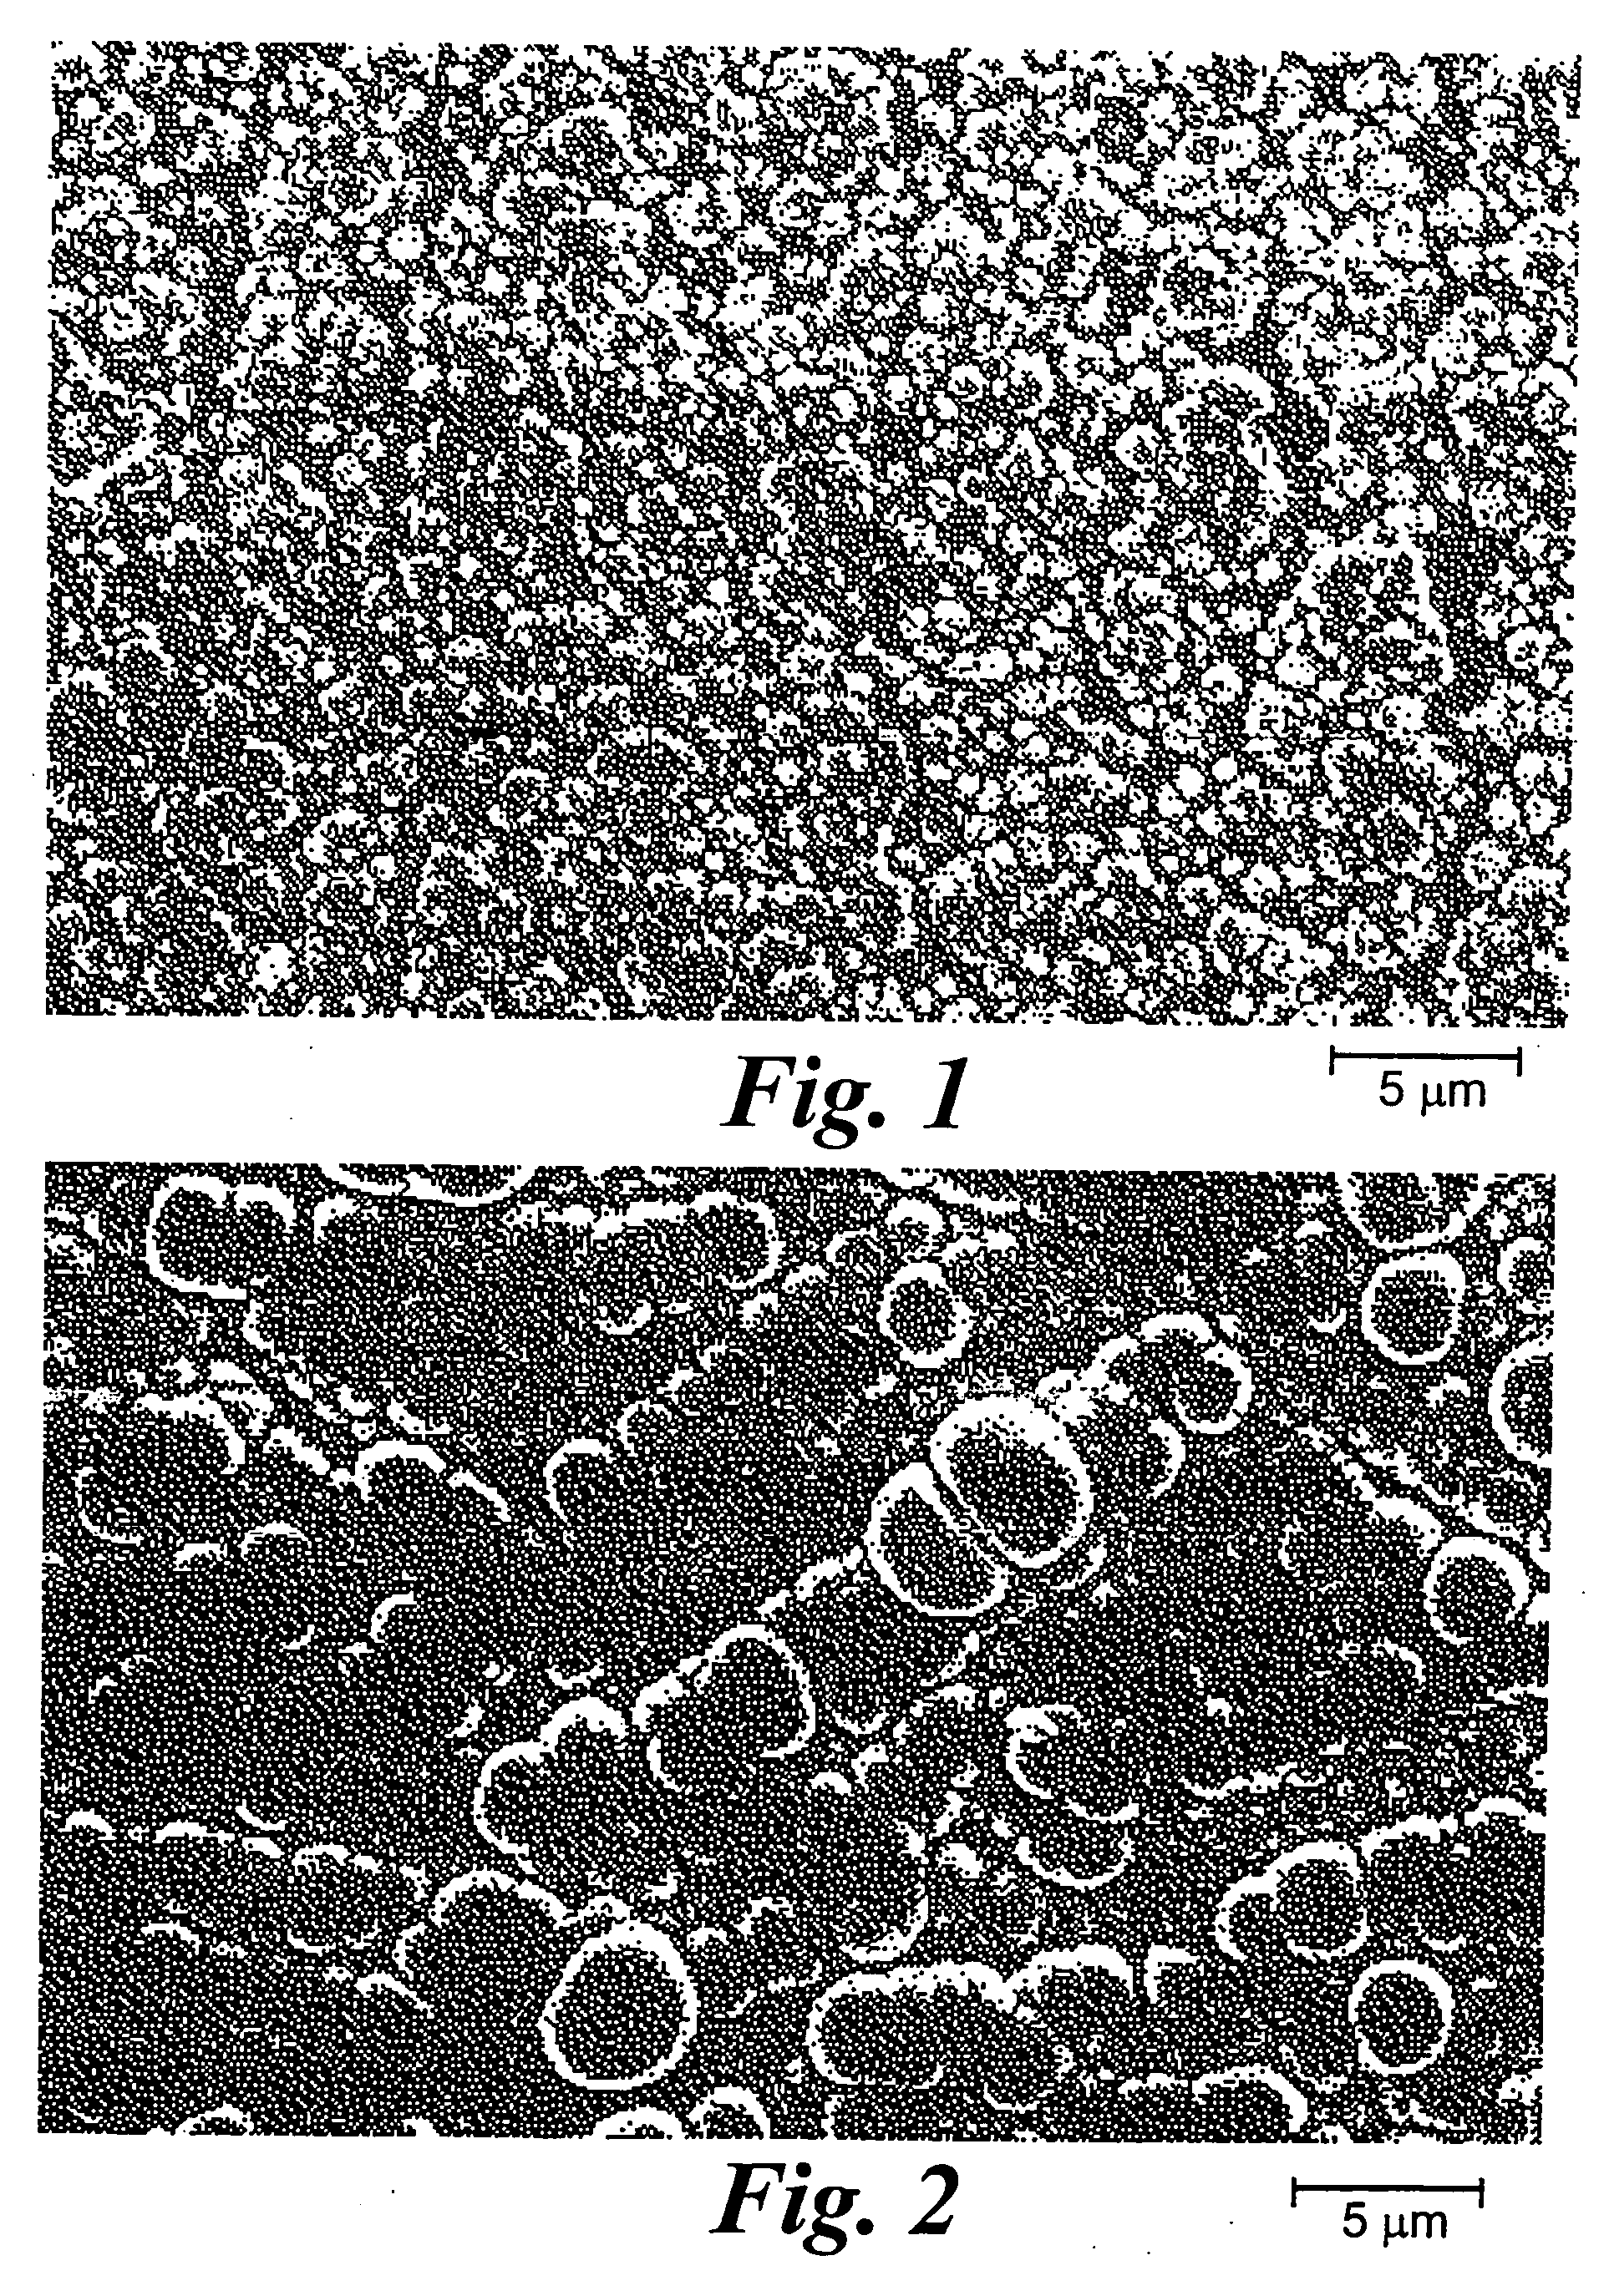 Adherent metal oxide coating forming a high surface area electrode